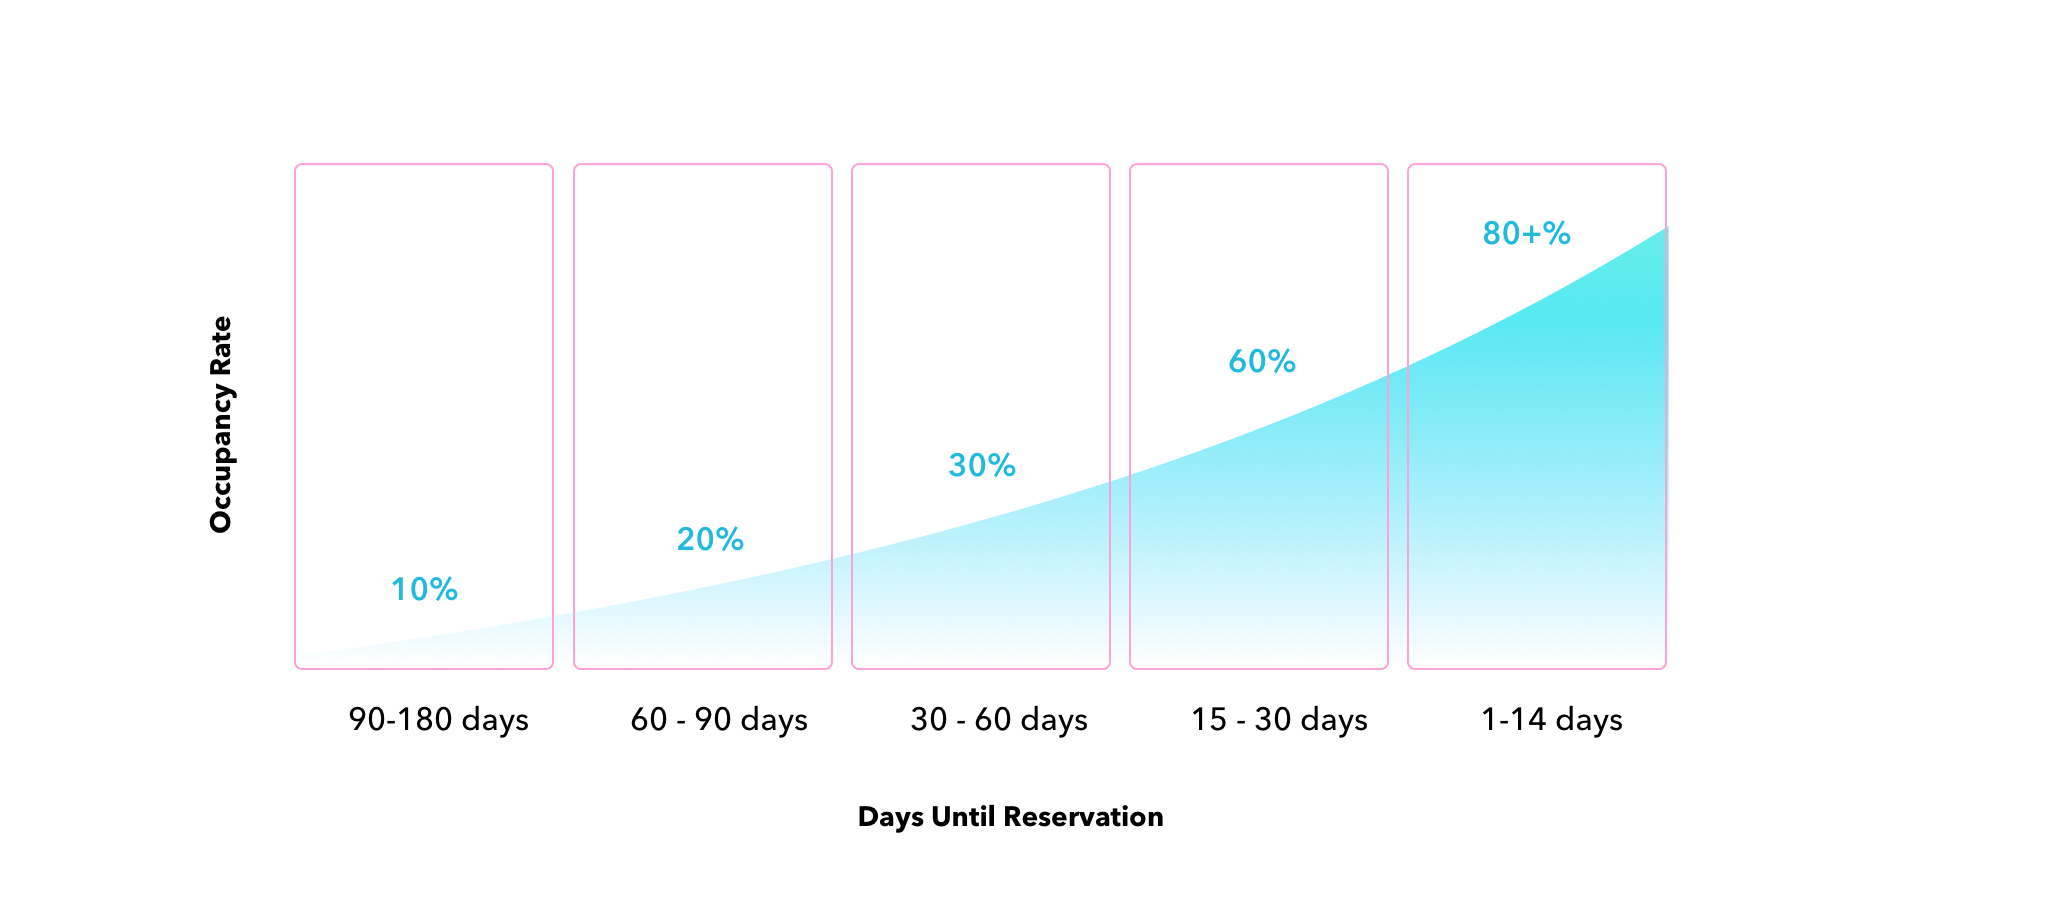 Airbnb occupancy rate leading up to reservation